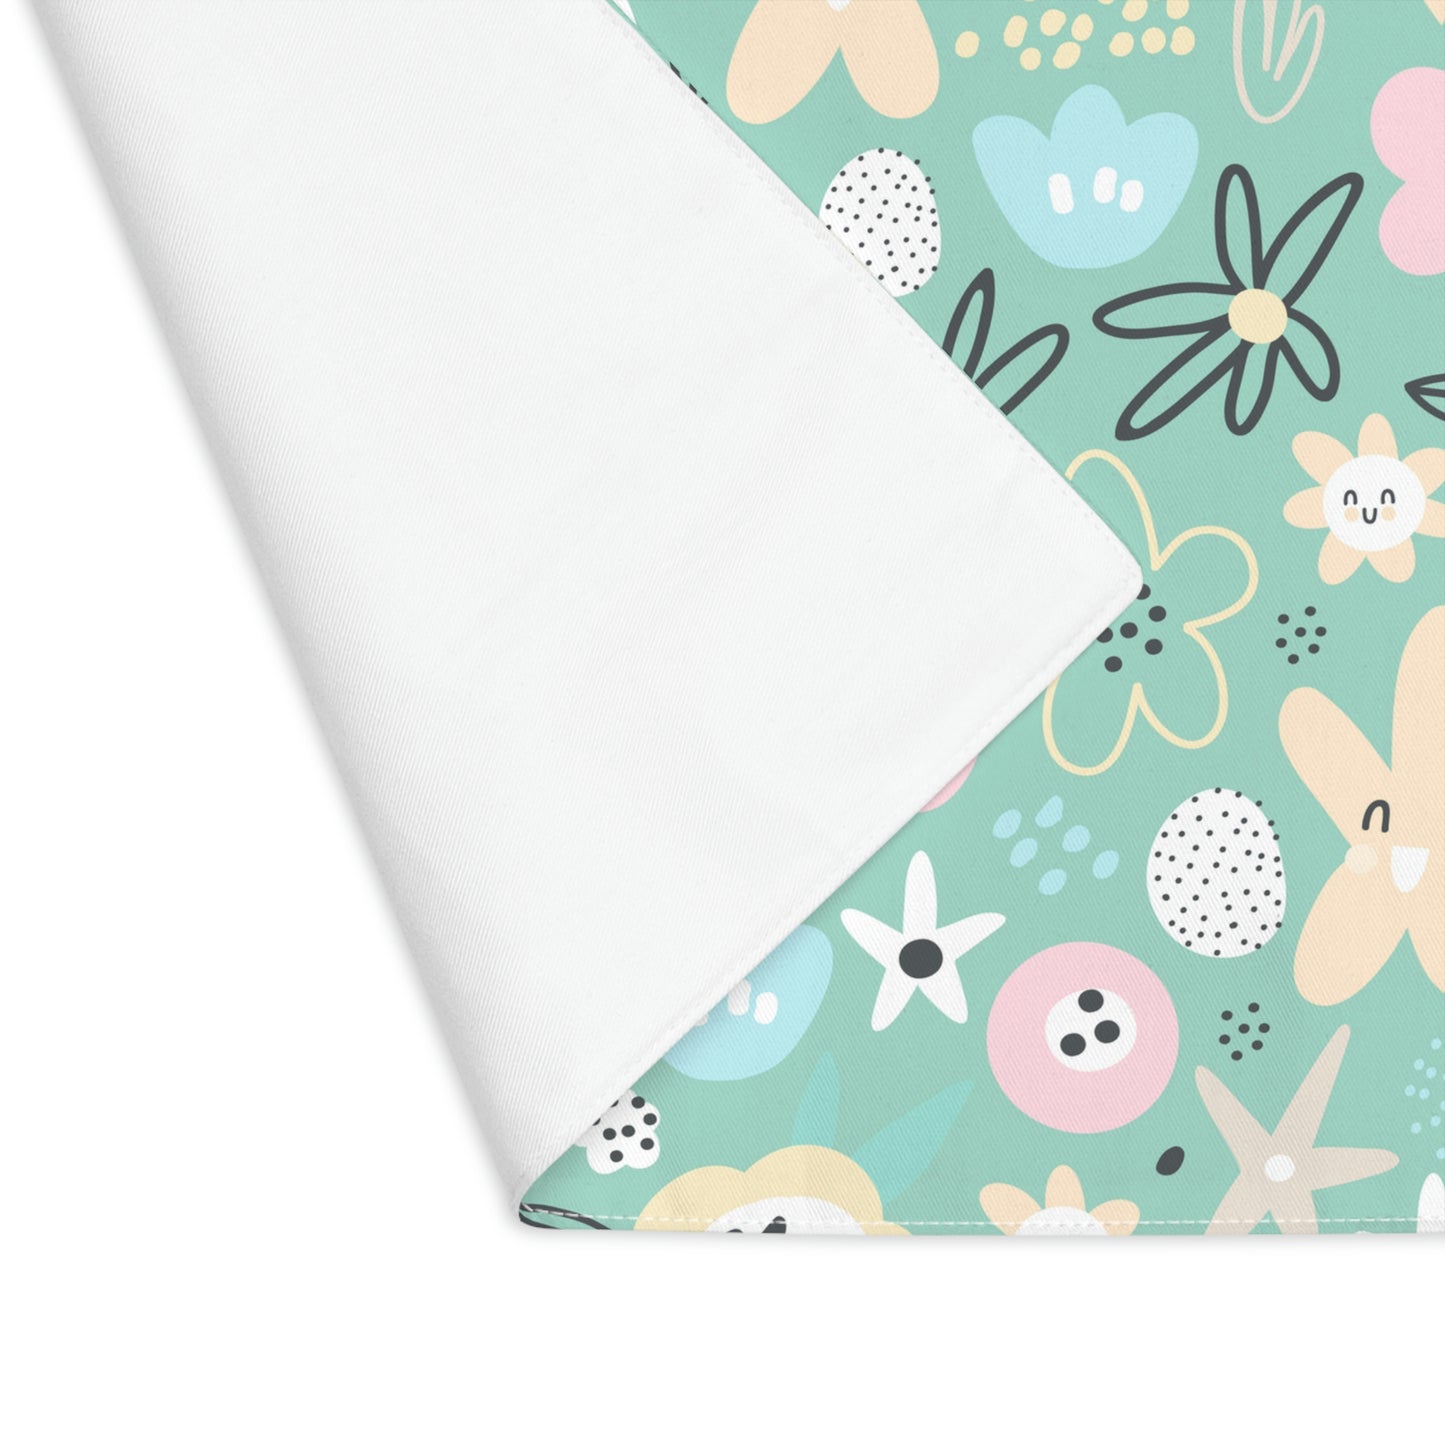 Abstract Flowers Placemat, 1pc